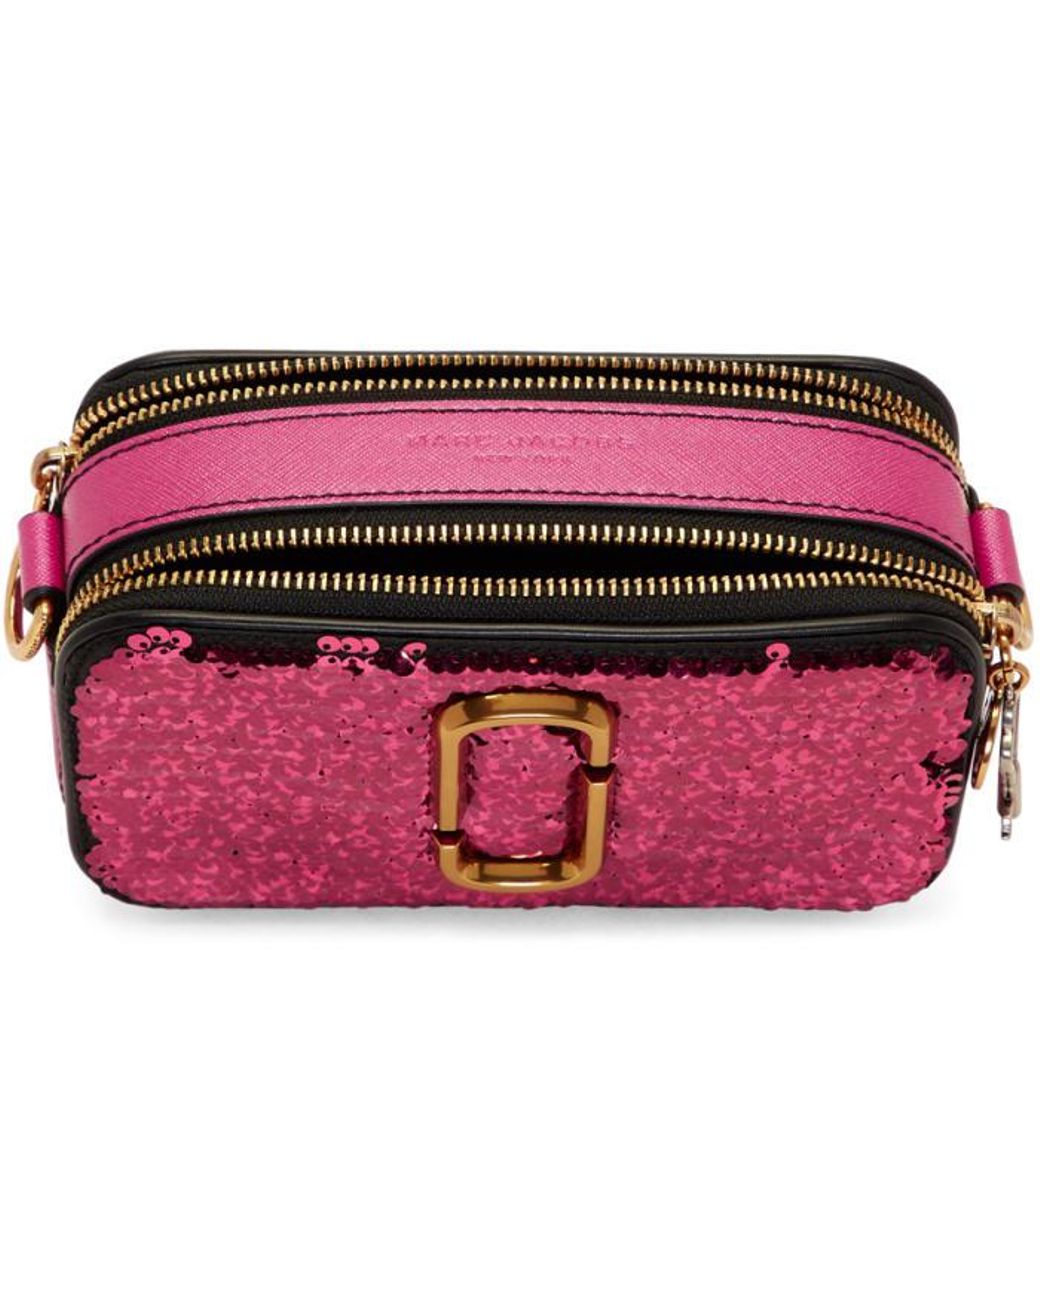 Marc Jacobs Saffiano Sequin Crystal Embellished Small Snapshot Camera Bag